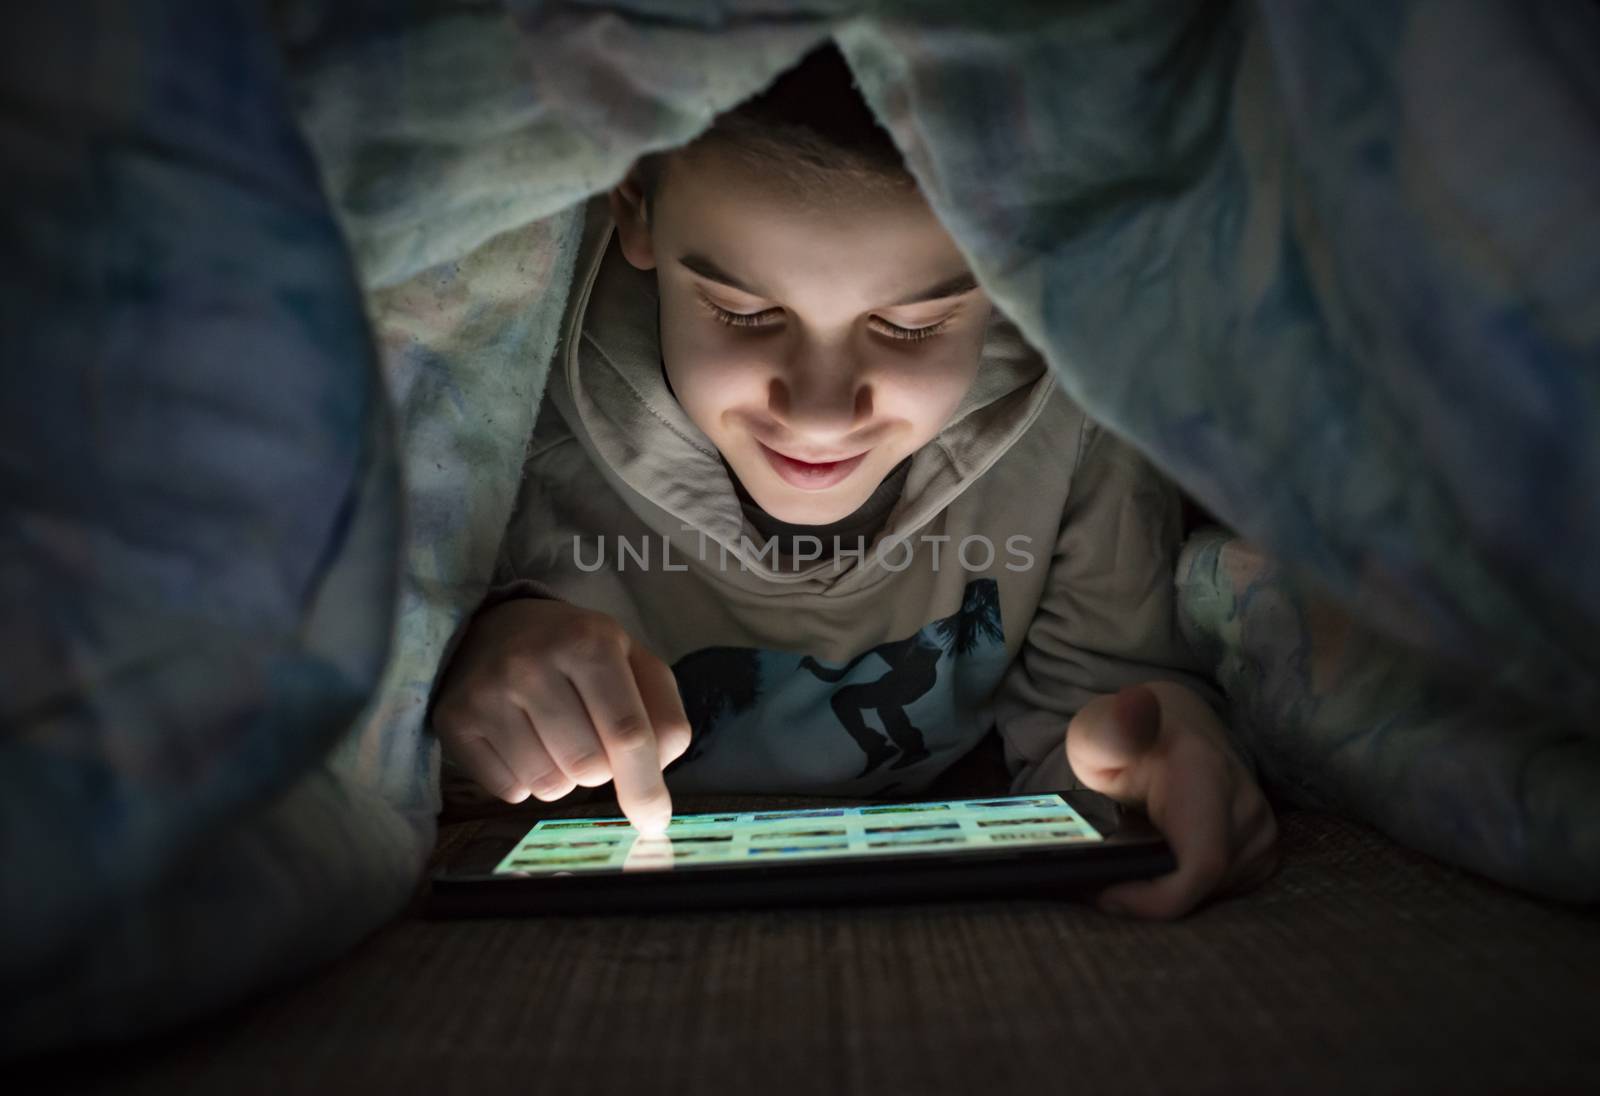 Child watching his tablet in the bed. Illuminated child face from device screen. Smiling Boy under the covers hold a tablet. Night time.